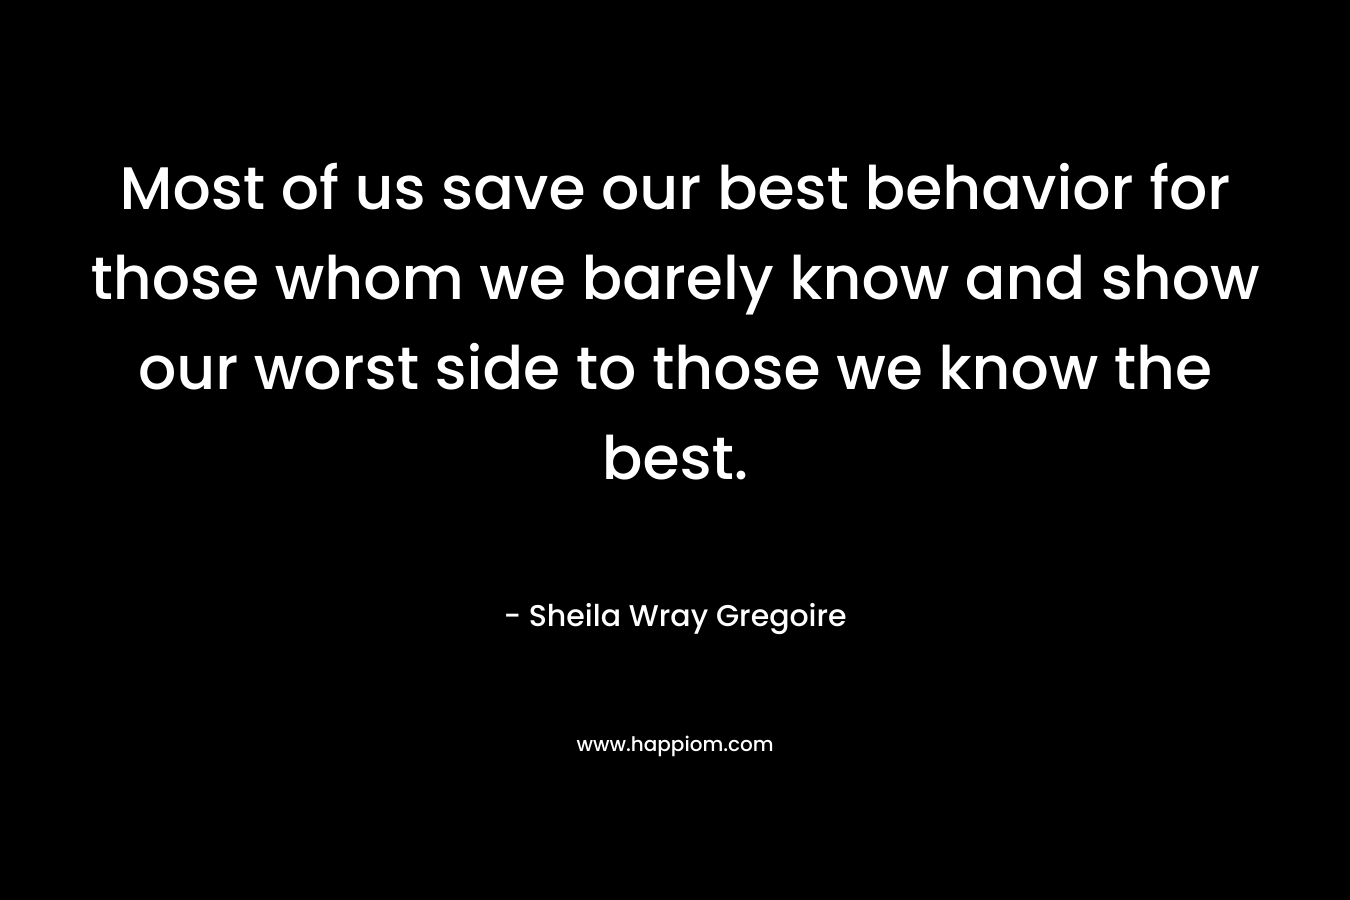 Most of us save our best behavior for those whom we barely know and show our worst side to those we know the best.